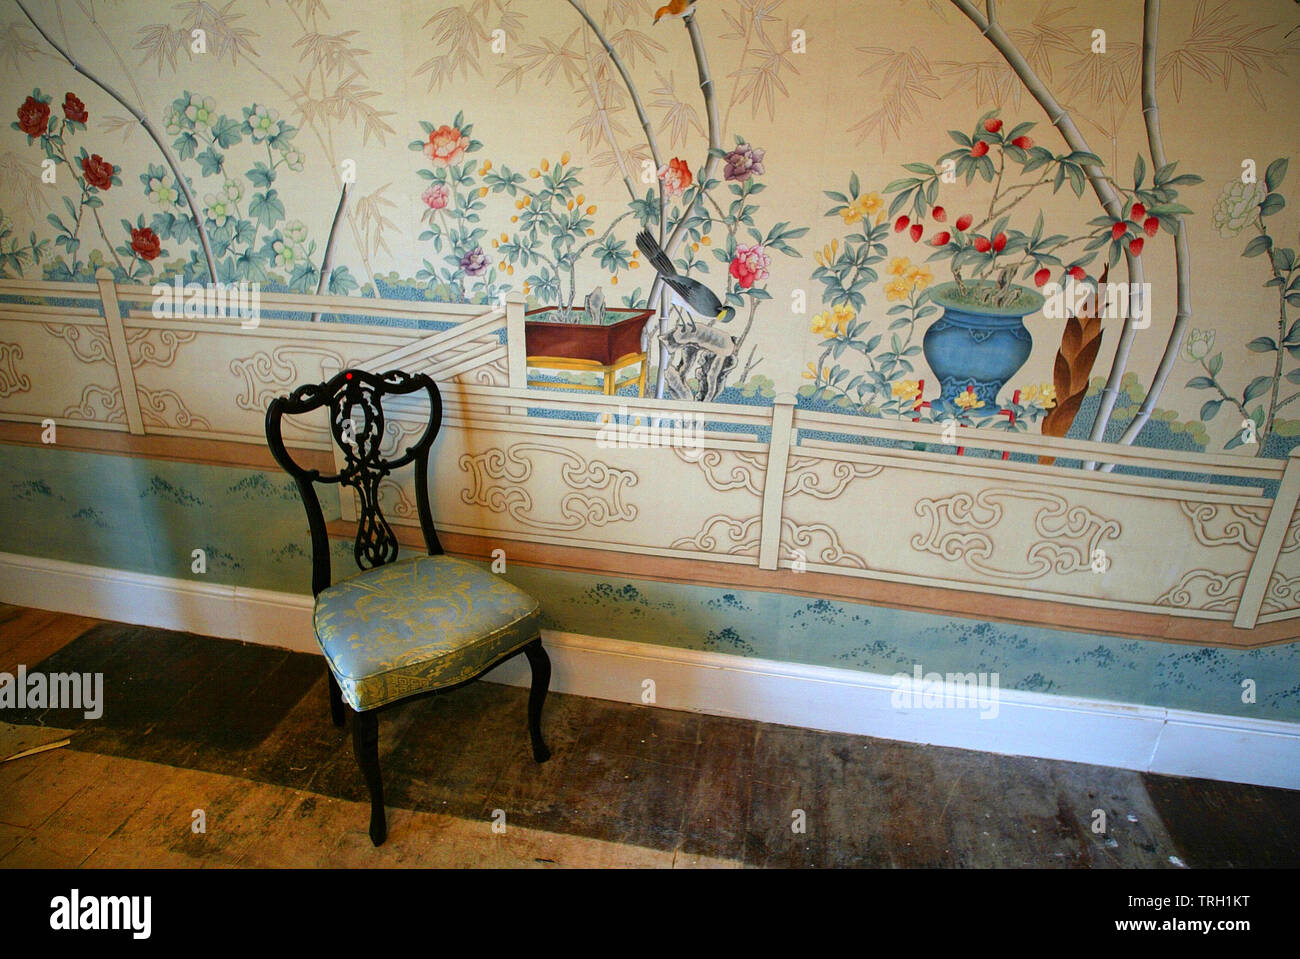 09.11.2004 - Original wallpaper on a bedroom wall at Endsleigh House near Tavistock in Devon, UK, owned by Olga Polizzi, soon to be turned into a hotel run by Olga's daughter Alex Polizzi. Stock Photo